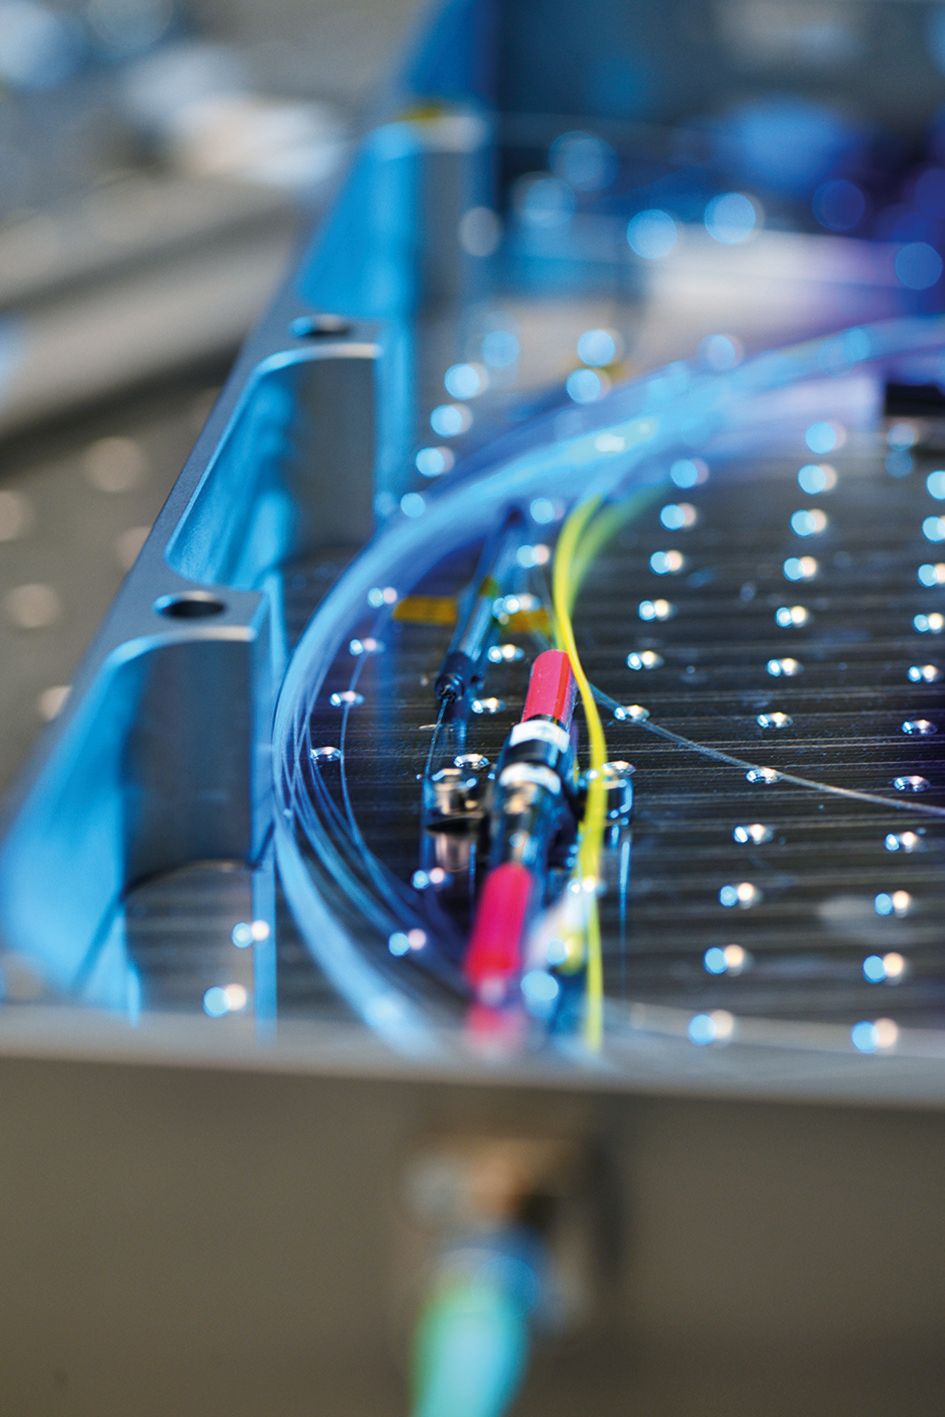 A prototype for the highly stable holmium-doped fiber amplifier is currently being developed at the Fraunhofer ILT. The new laser technology can potentially also be used in other application areas, e.g. in quantum technology or medical technology.